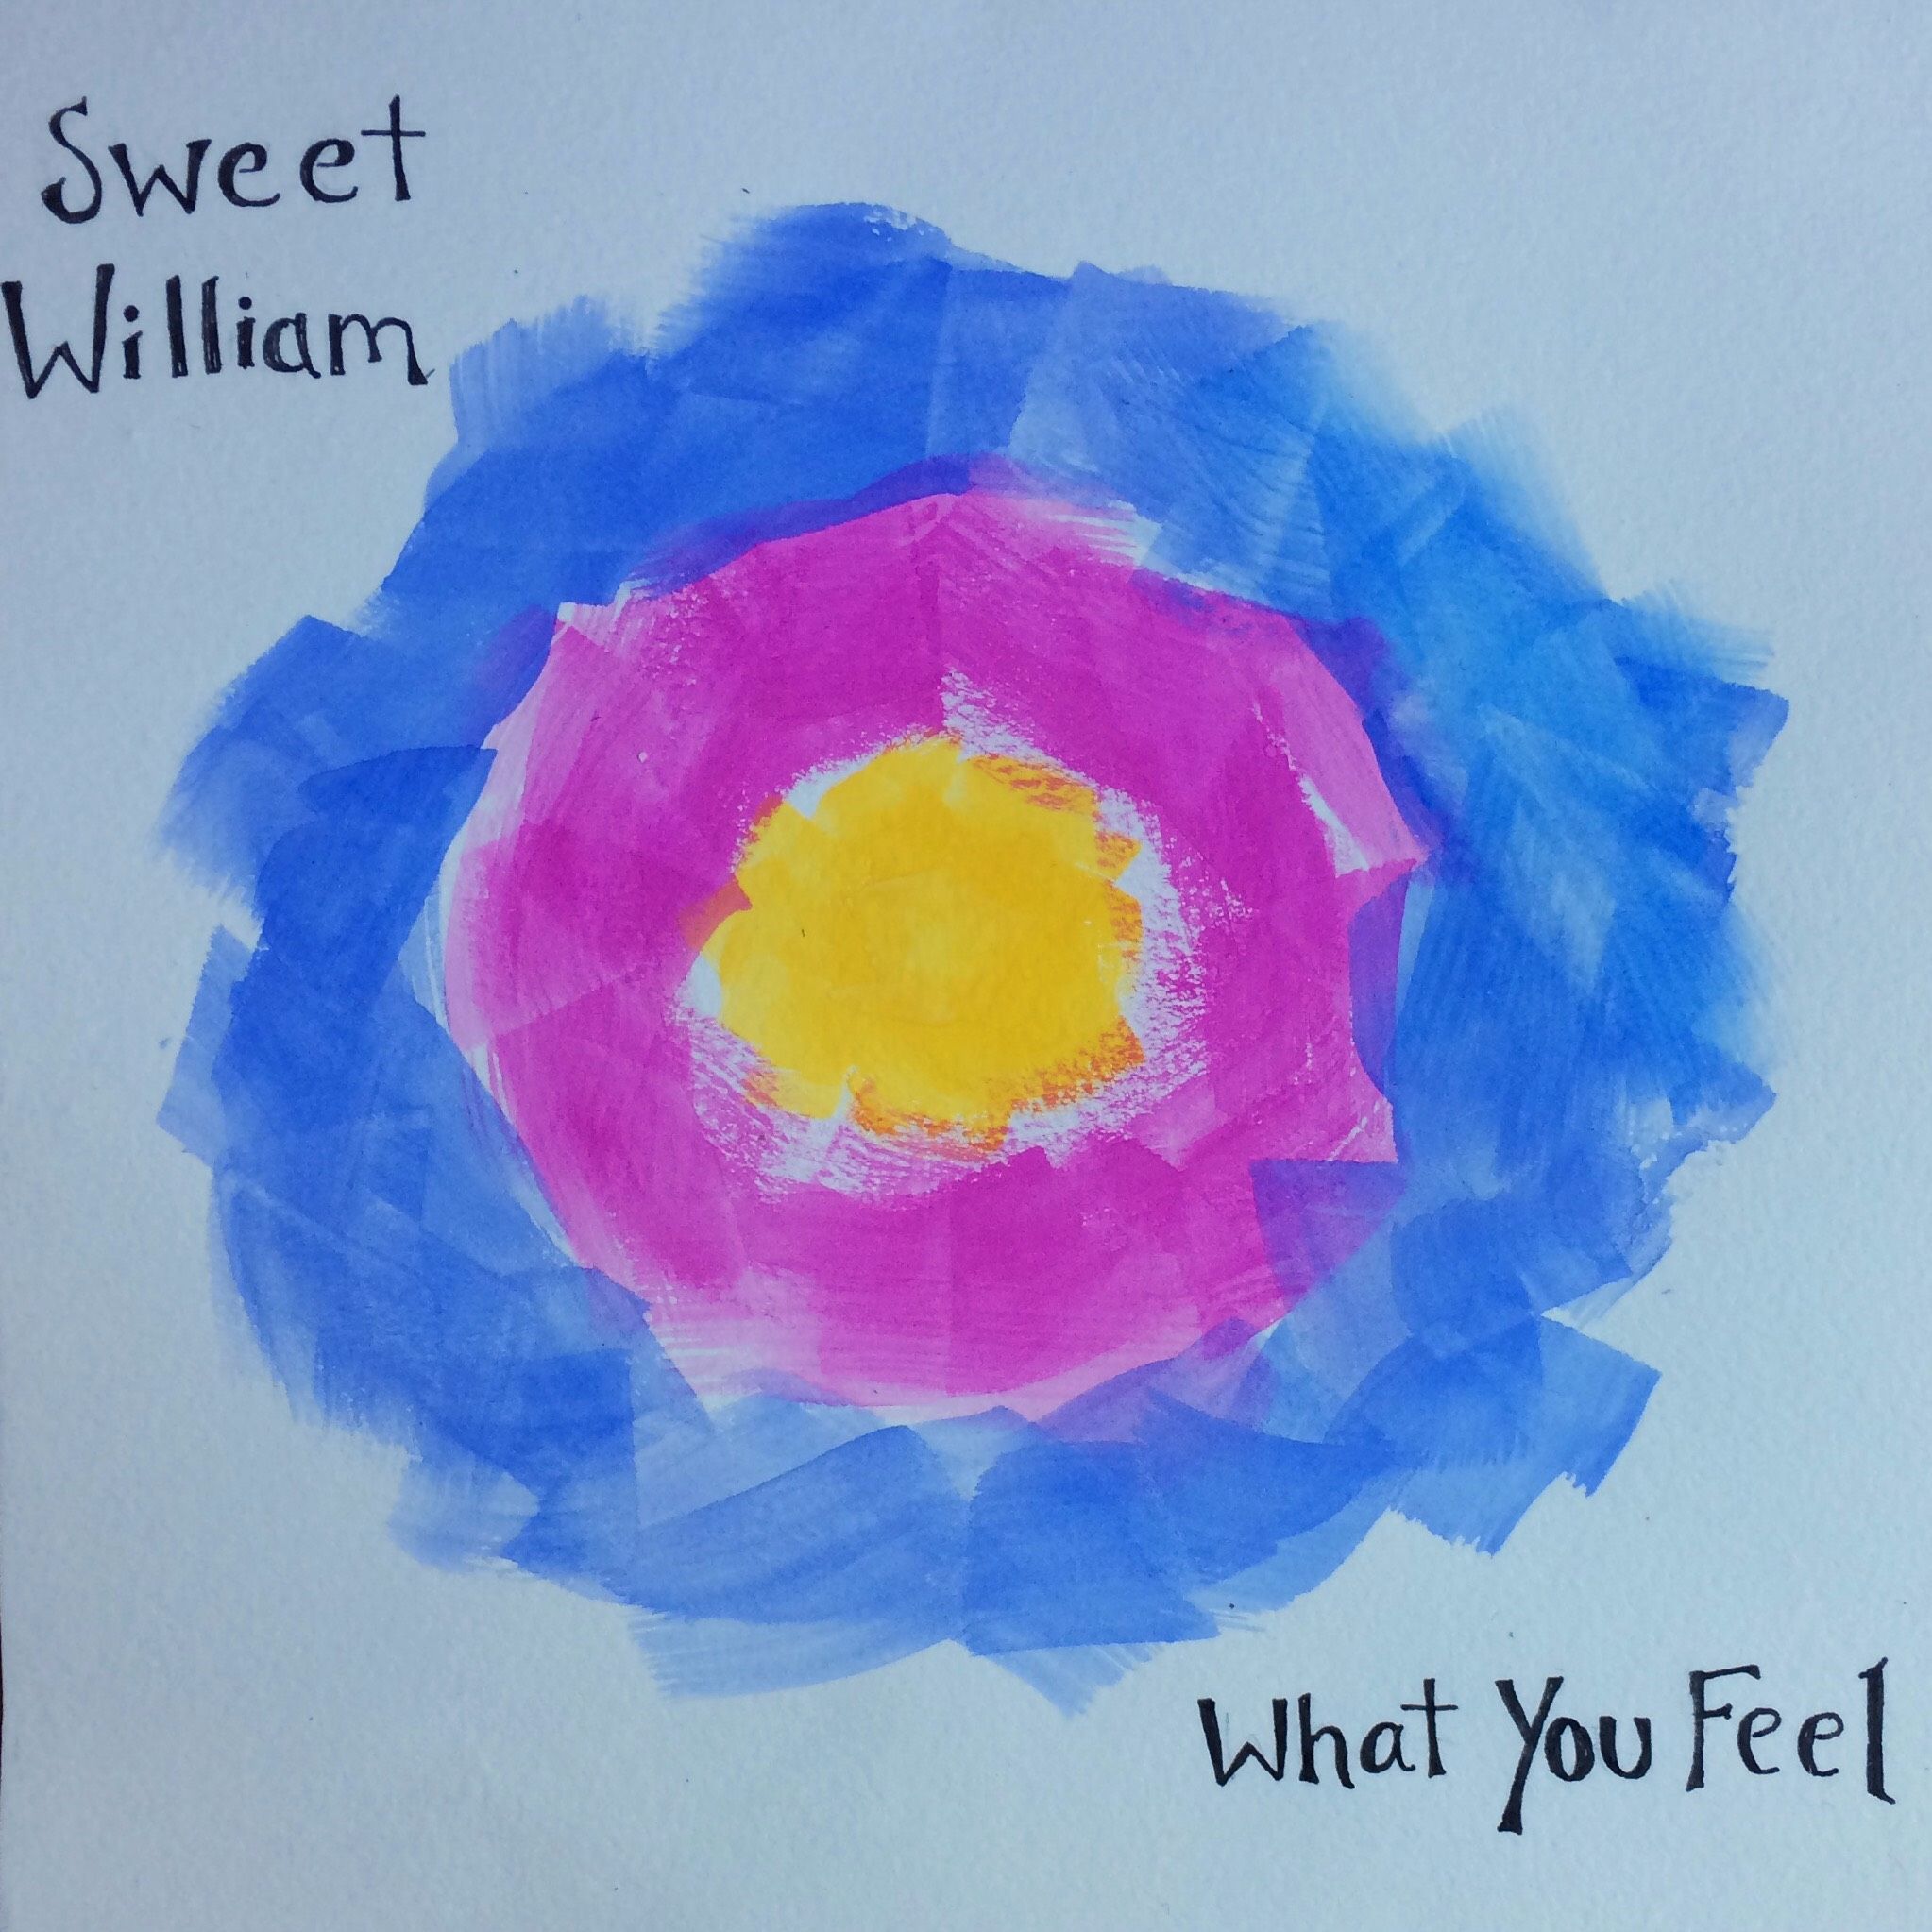 Sweet William – “My Connection”